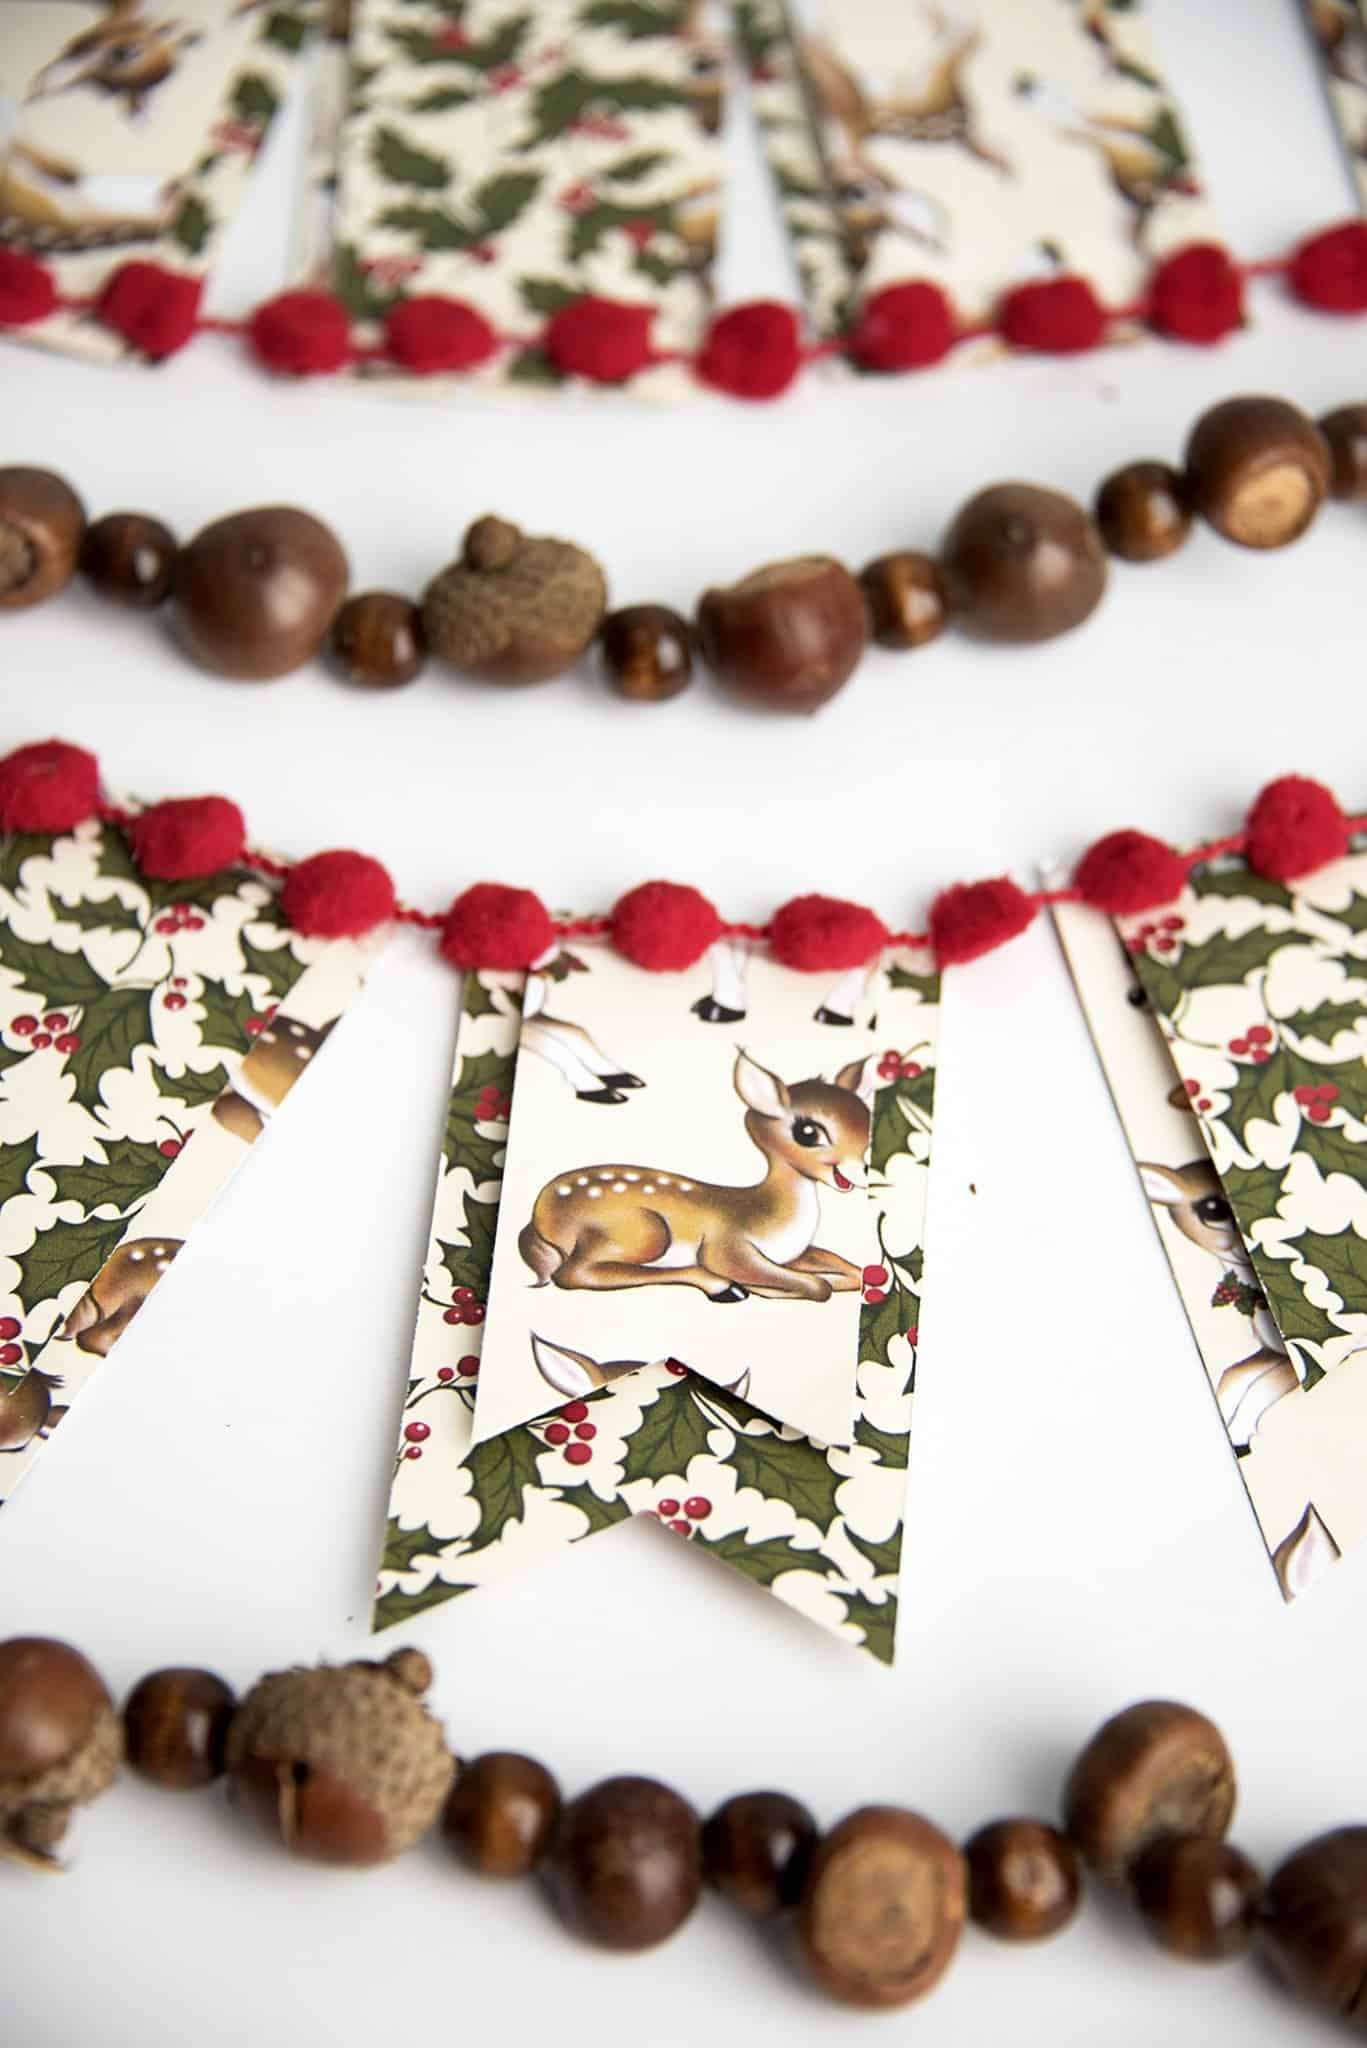 Add a little vintage holiday flair to your decorating with this easy DIY Christmas banner - all you need are a few simple supplies!